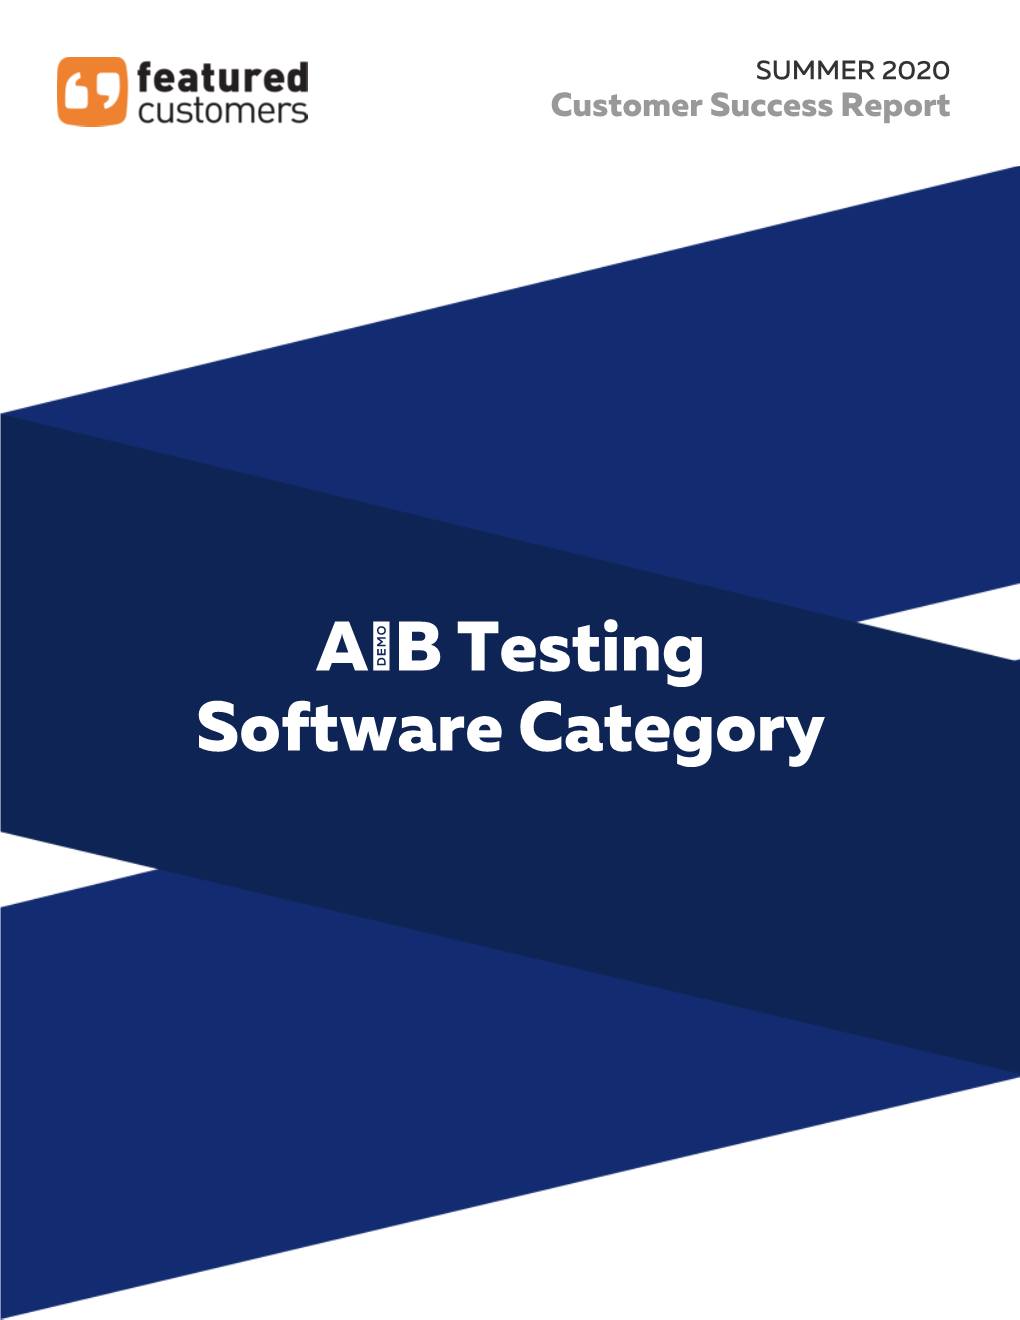 SUMMER 2020 A/B Testing Software Category